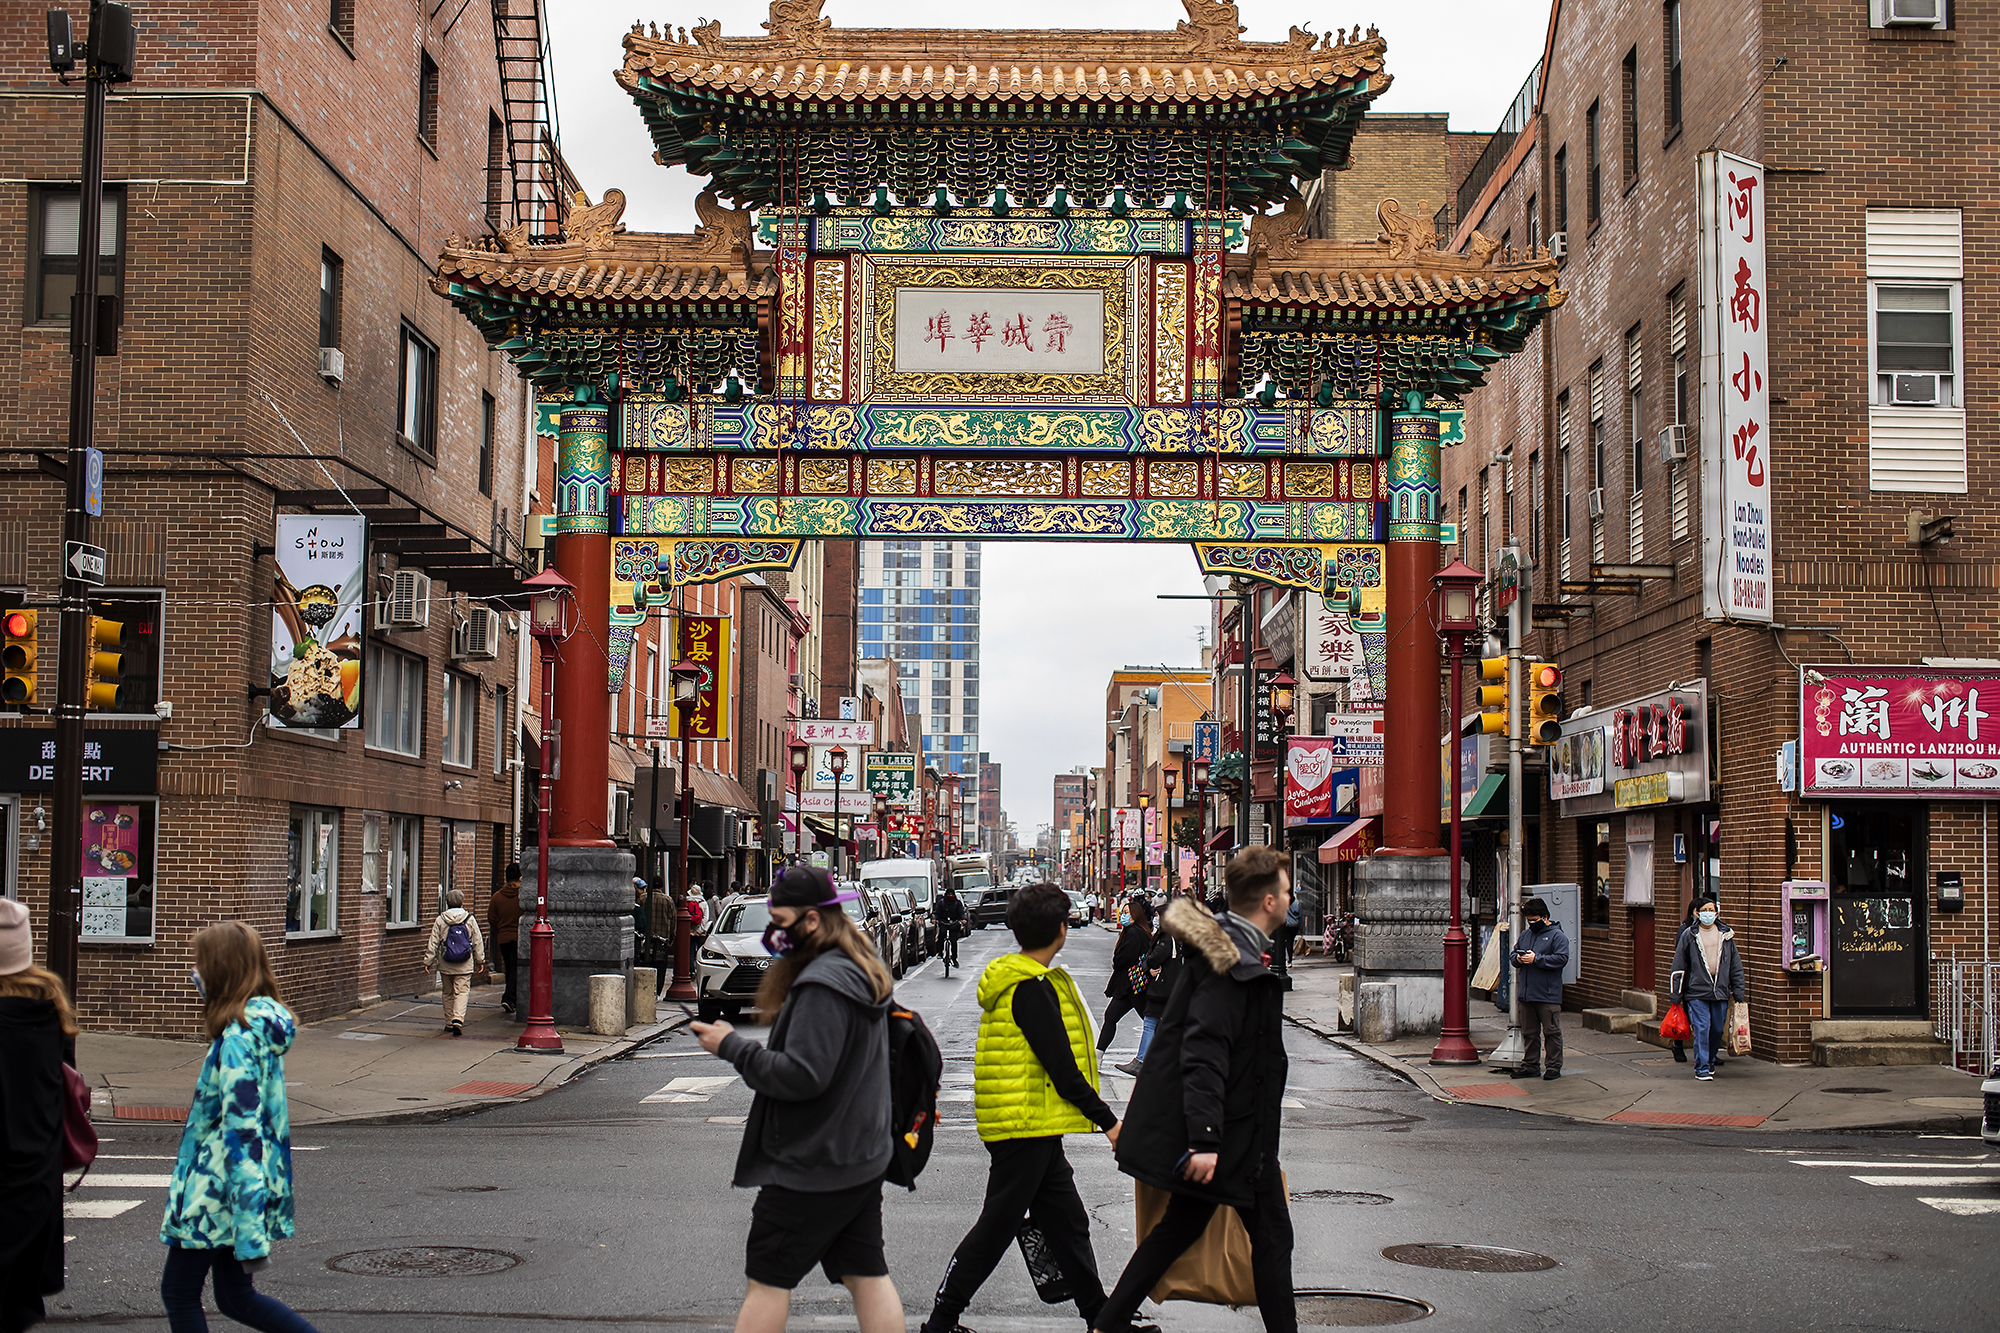 An image of the "Friendship Gate," with people walking by on a winter day